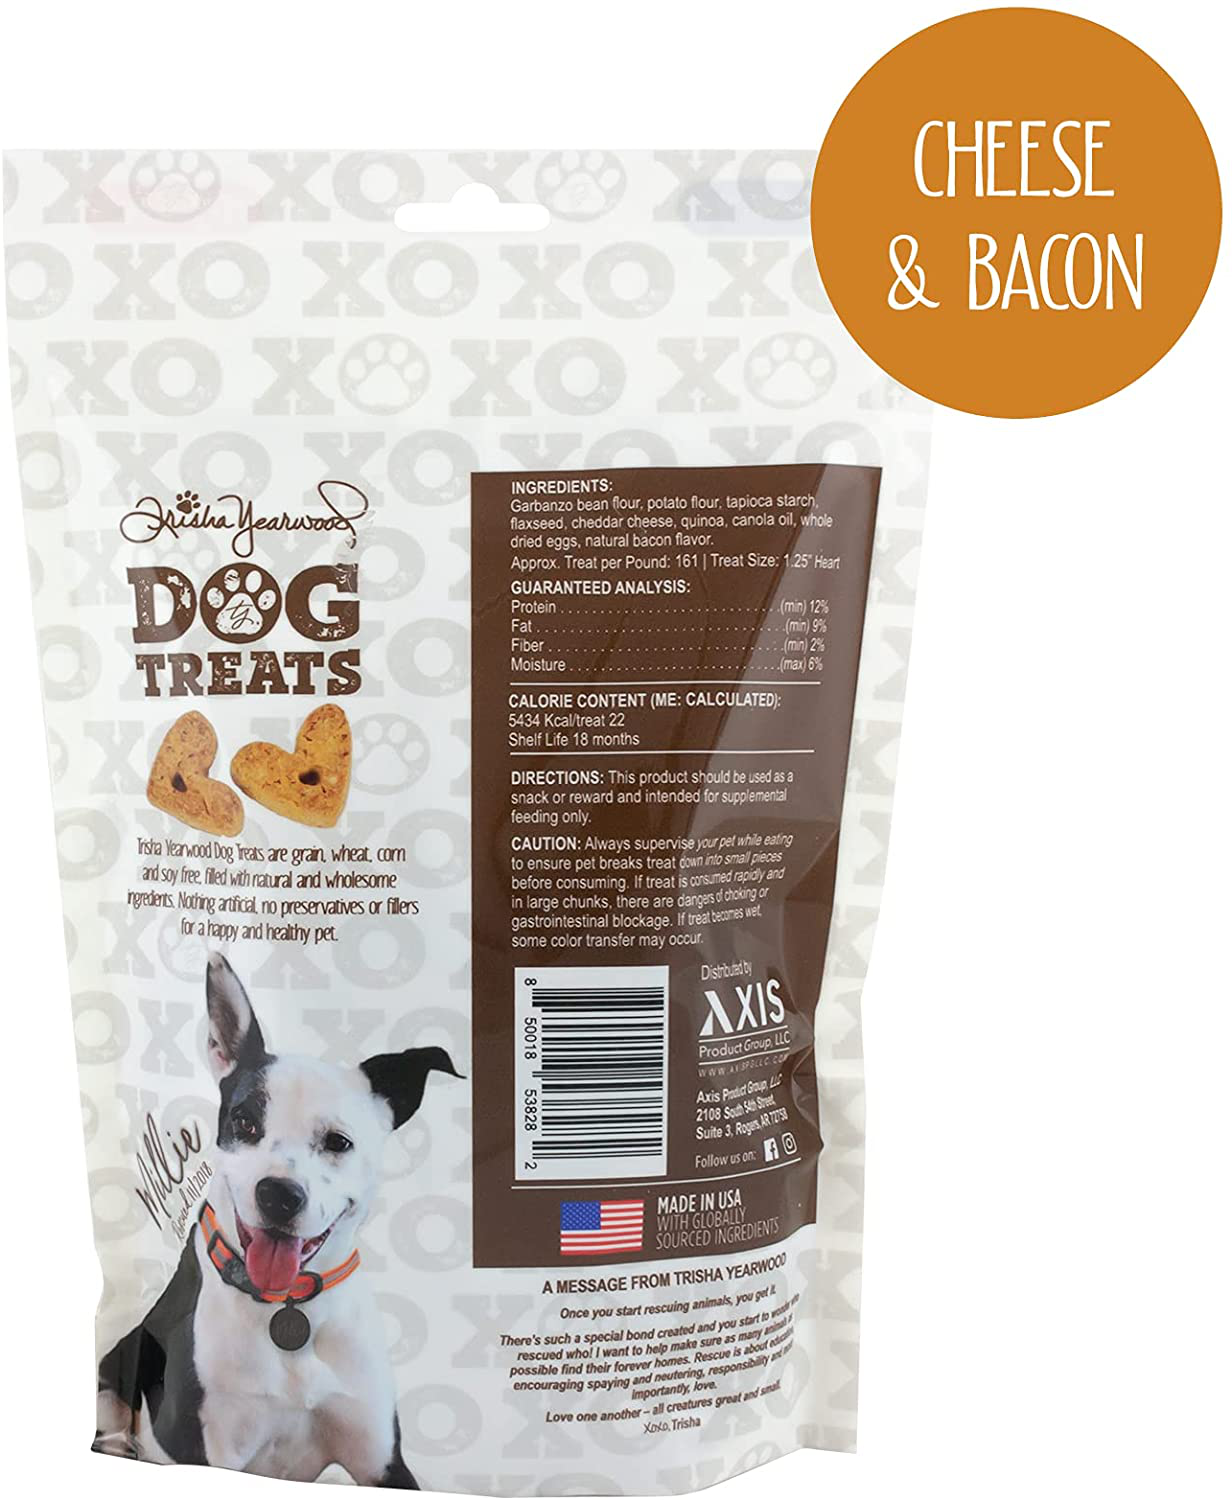 Trisha Yearwood Pet Collection Natural Grain-Free Dog Biscuits (Variety 3 Pack), All-Natural Healthy Dog Treats, Flavors Include Peanut Butter, Cheddar Cheese & Bacon, and Roasted Duck